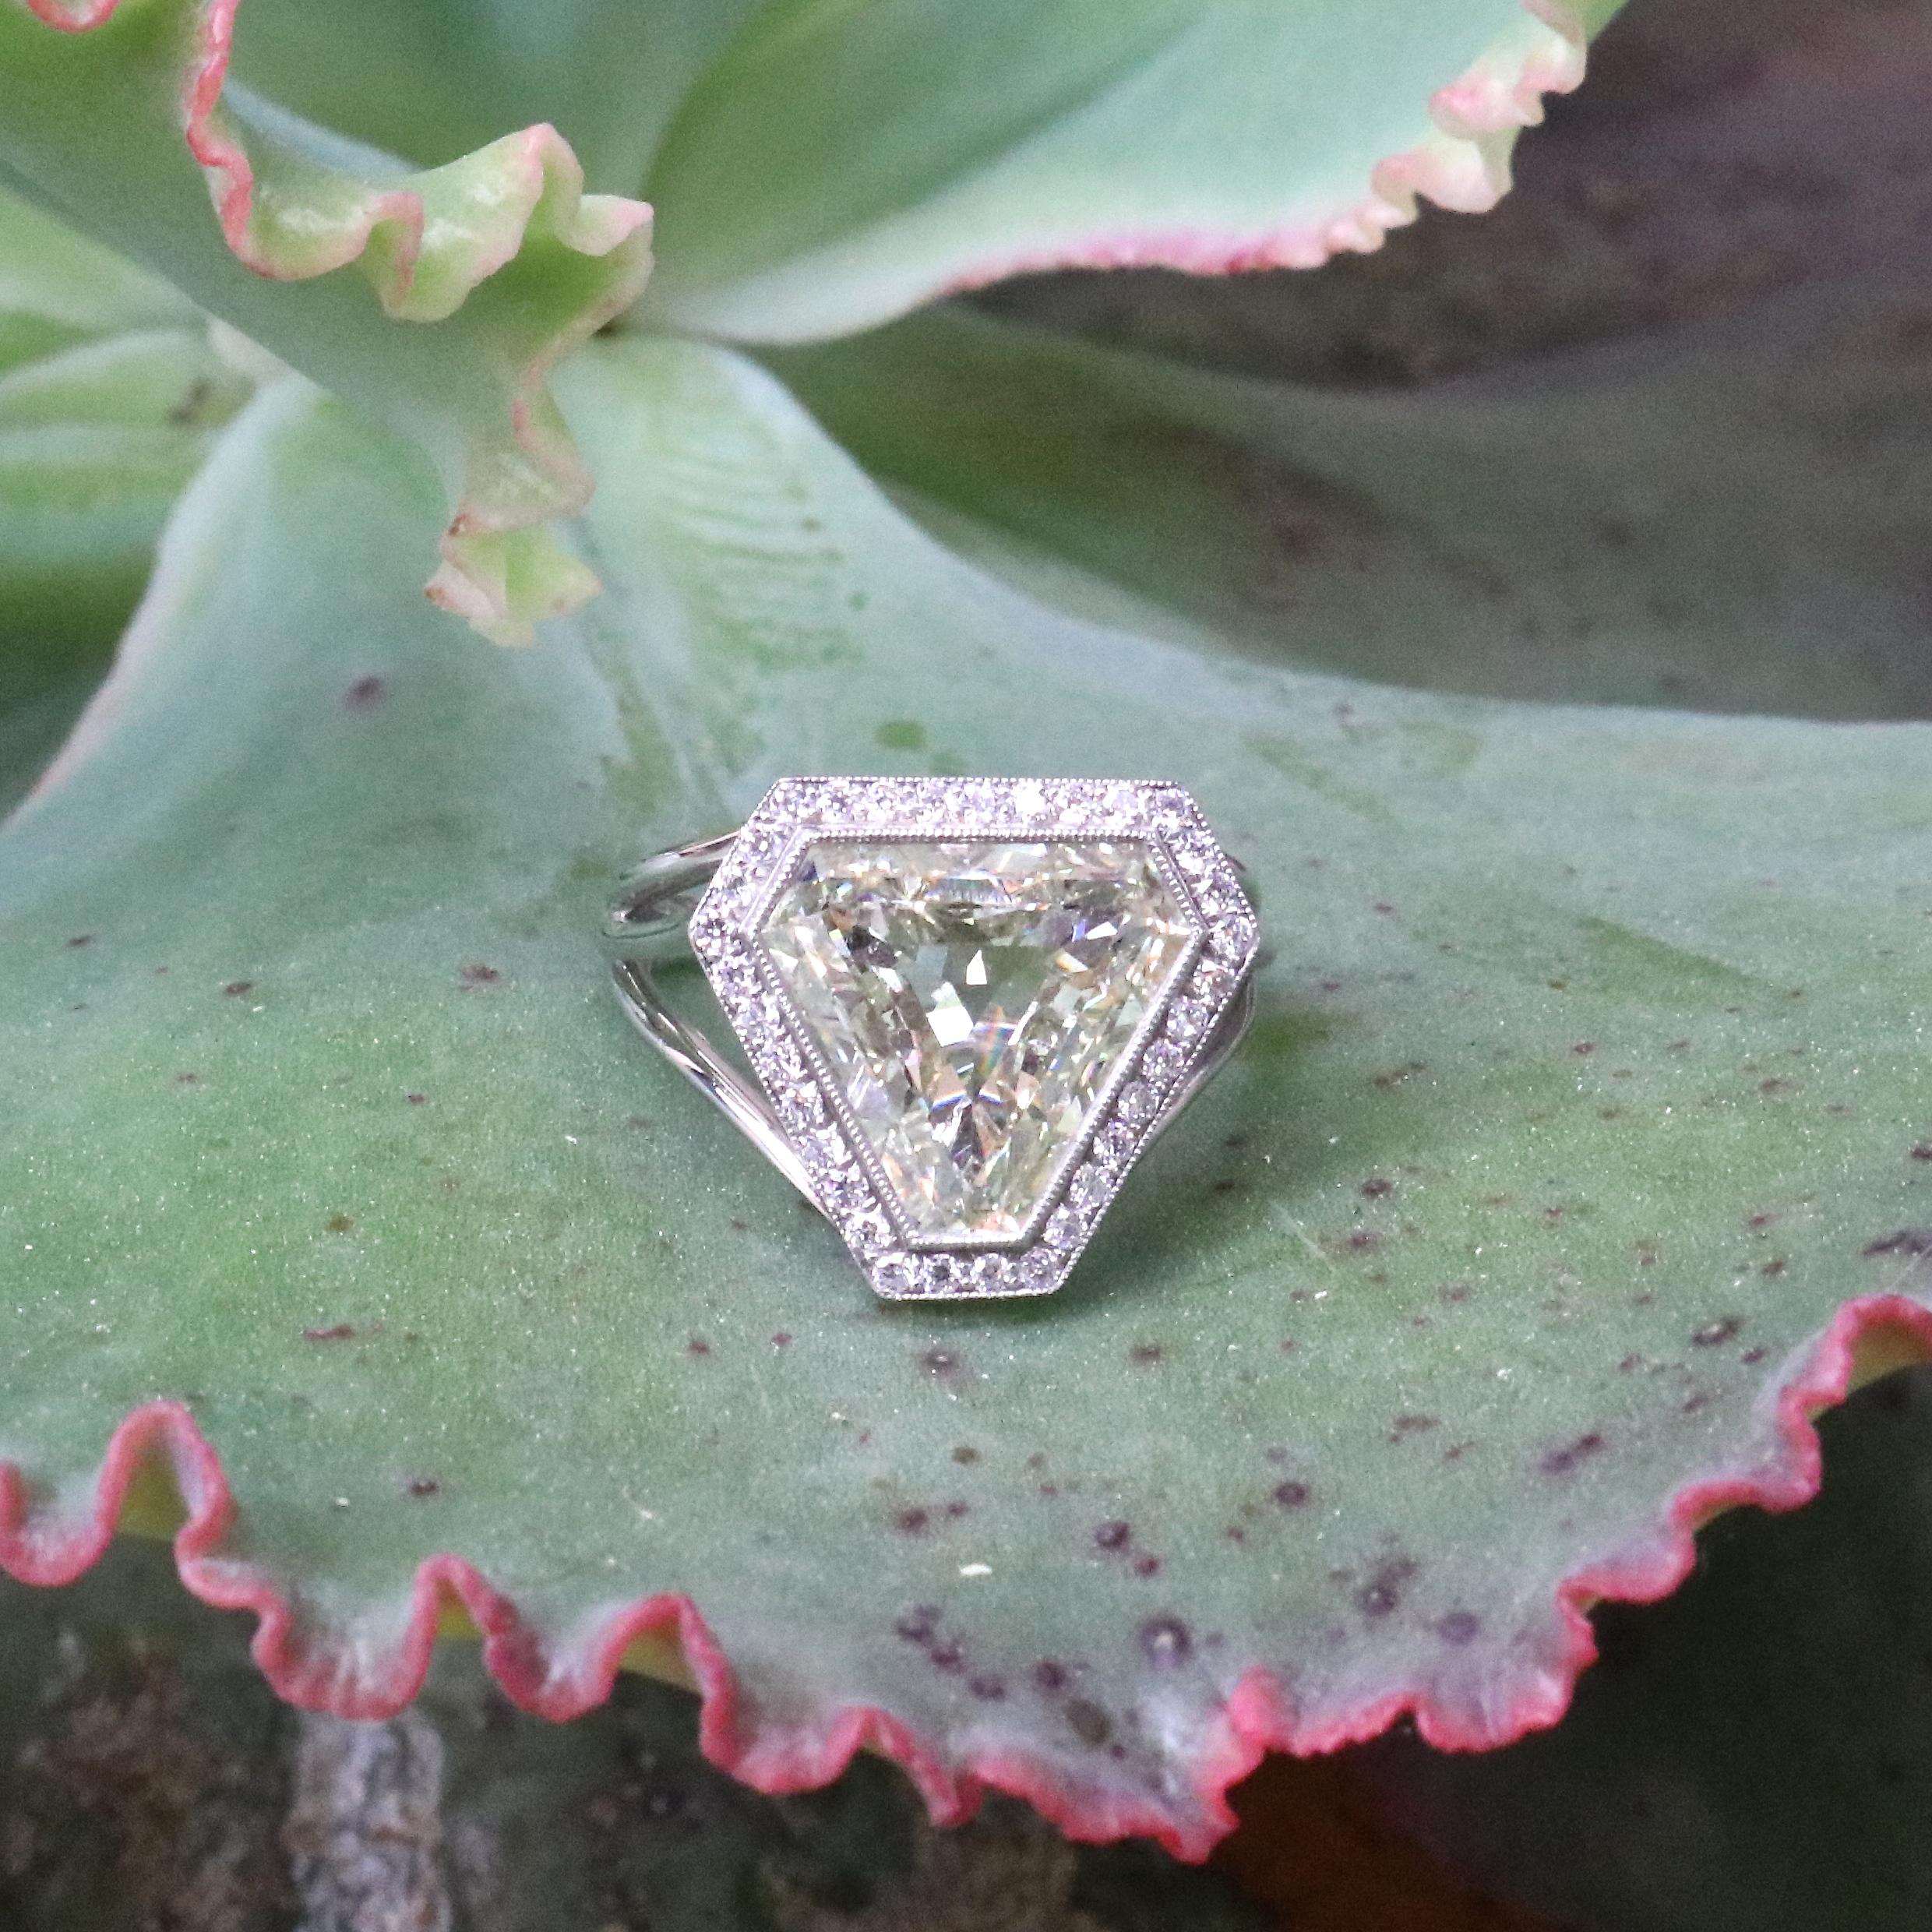 Engagement ring? This will be remembered long after the wedding party. Some will like the boldness of the ring, others will not. It's not for the faint of heart. Be a trendsetter if you dare. Featuring a GIA triangular step cut diamond, certified as